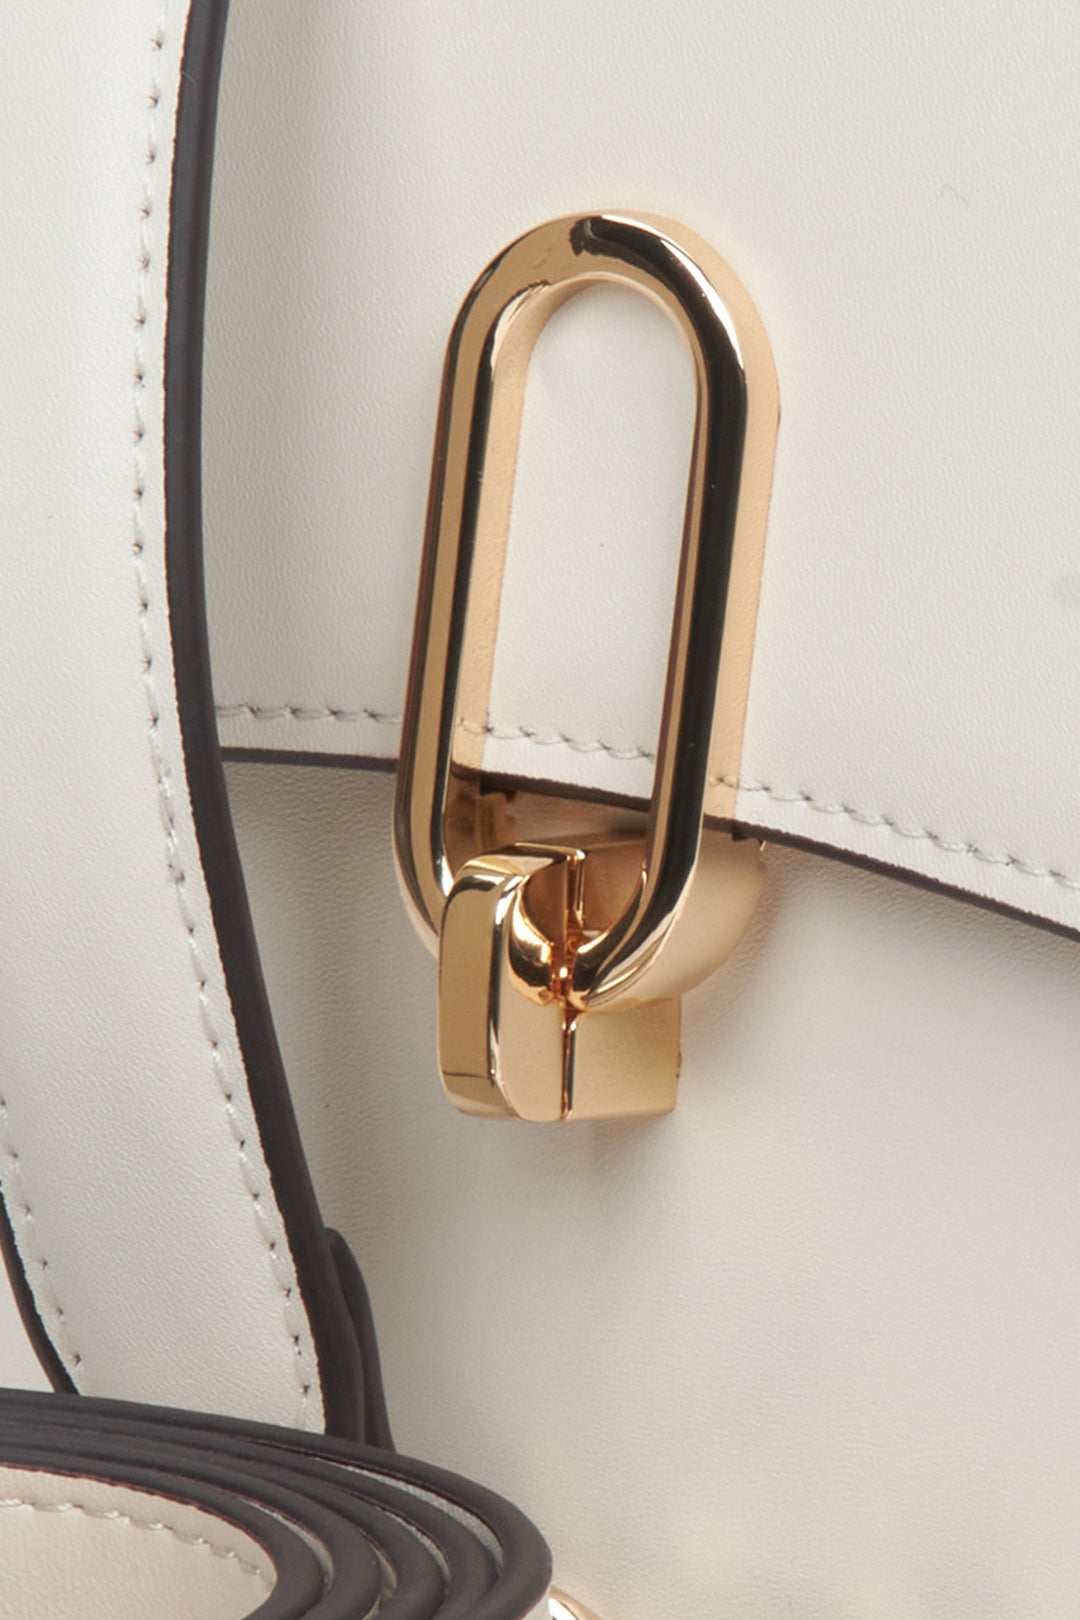 Women's leather white handbag Estro with golden fittings - presentation of the entire set.